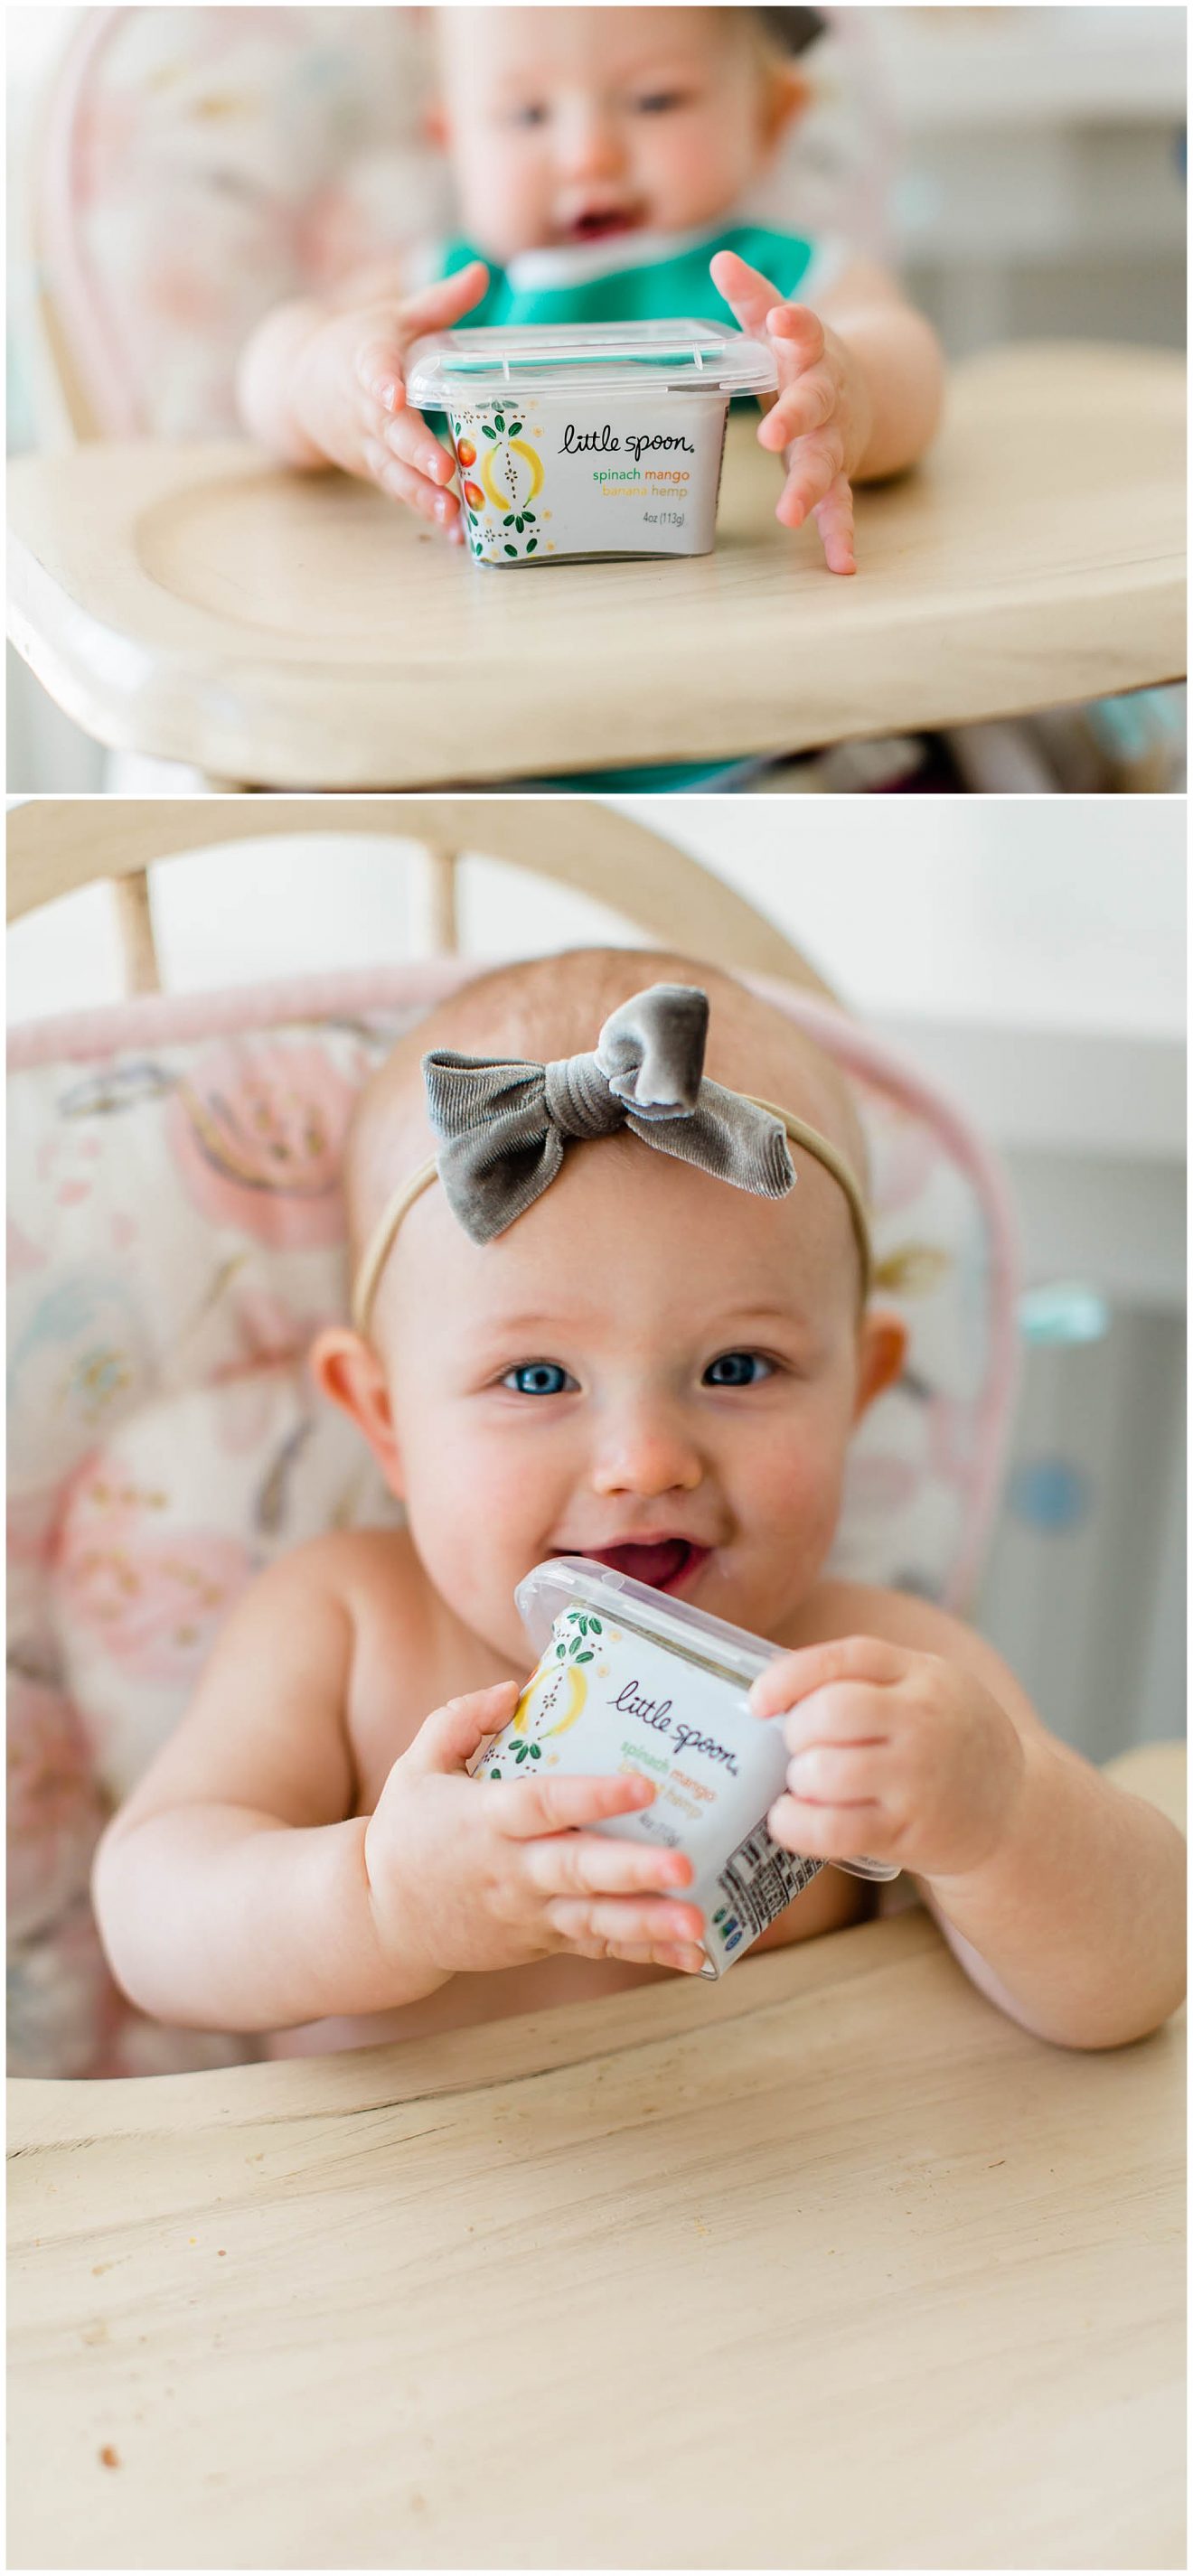 Baby girl sitting in her highchair holding a Little Spoon Babyblend.